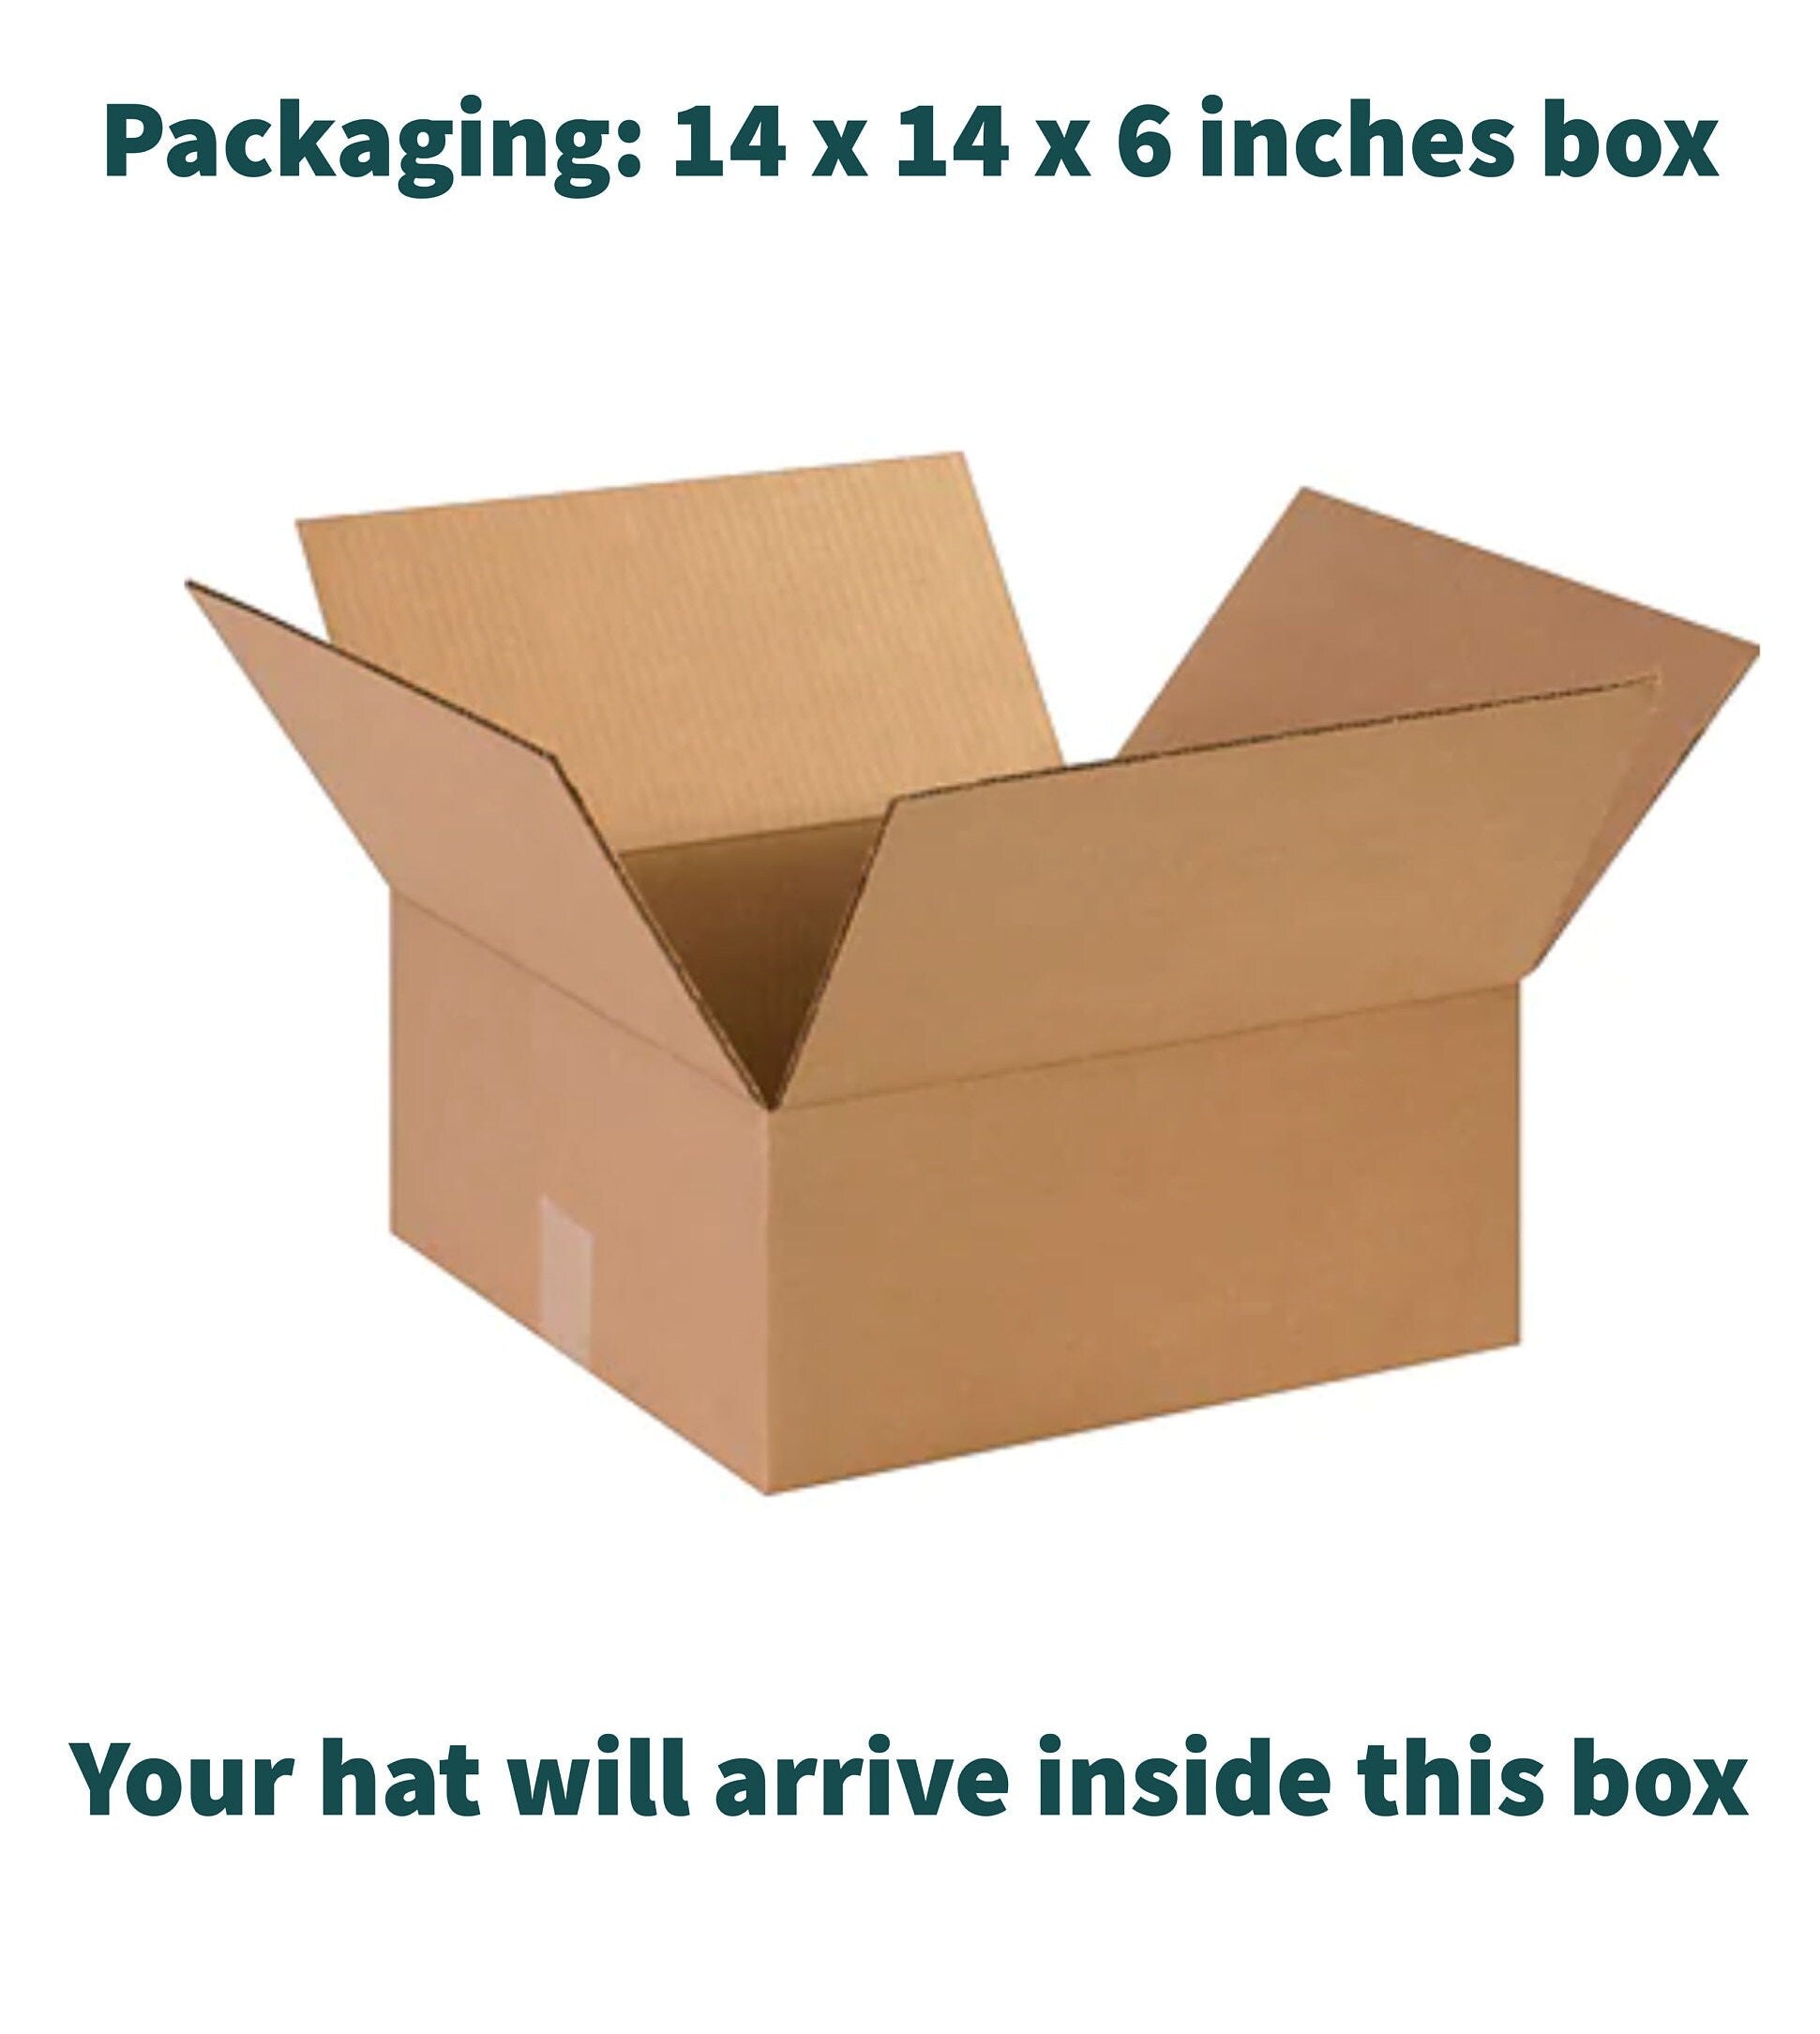 Packaging box for the hat